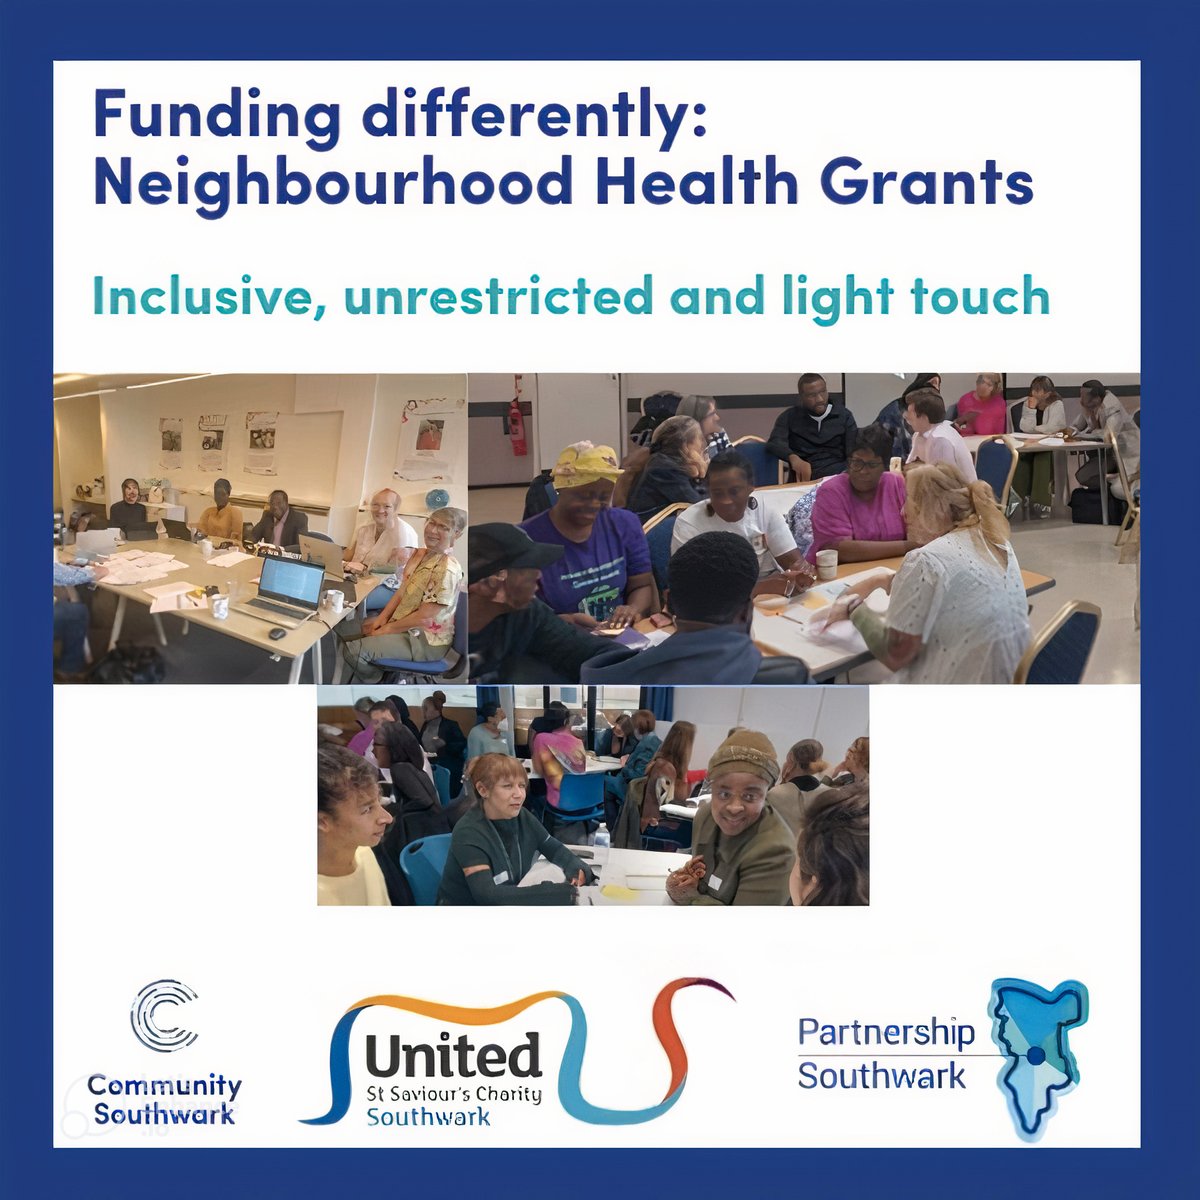 🚀 Exciting news! 2nd round of 'Funding Differently' is now open for VCS groups in #Southwark. Be one of the 10 to get a £5,000 grant! Simplified process, quick decisions. More details & apply ➡️ bit.ly/3tU17cc🔗#GrantOpportunity #CommunityFunding